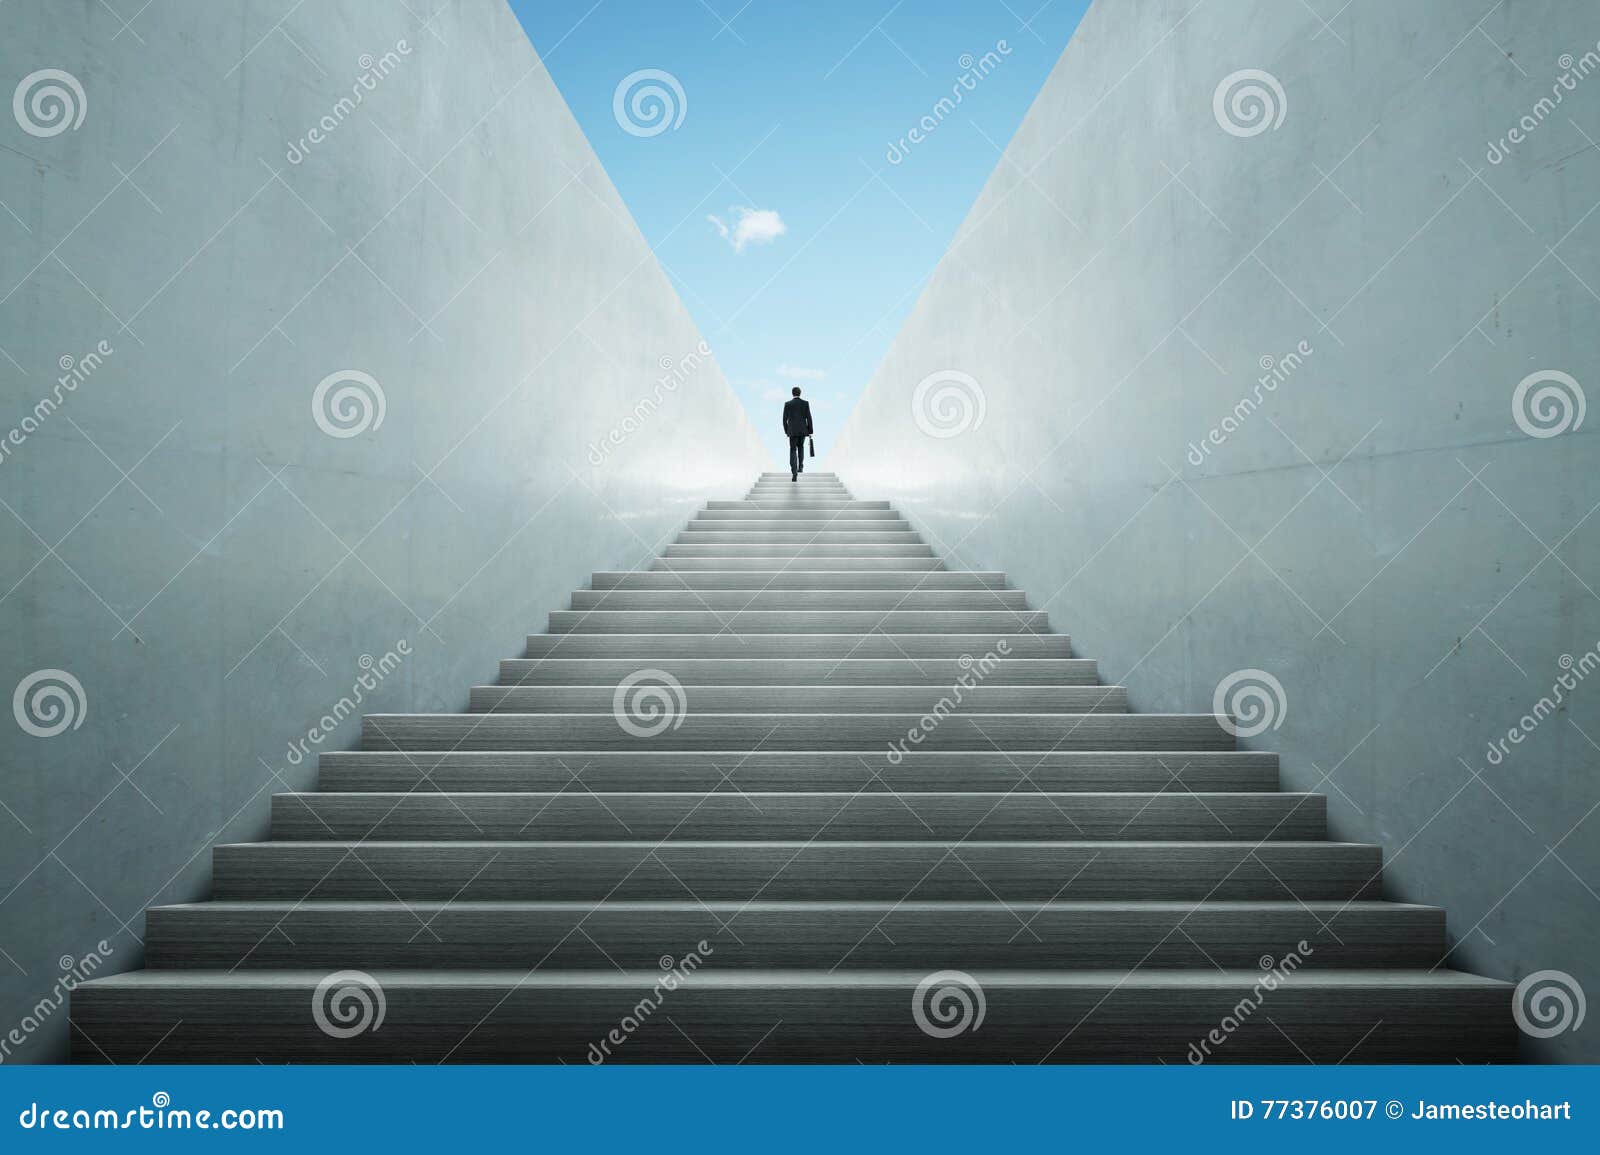 ambitions concept with businessman climbing stairs